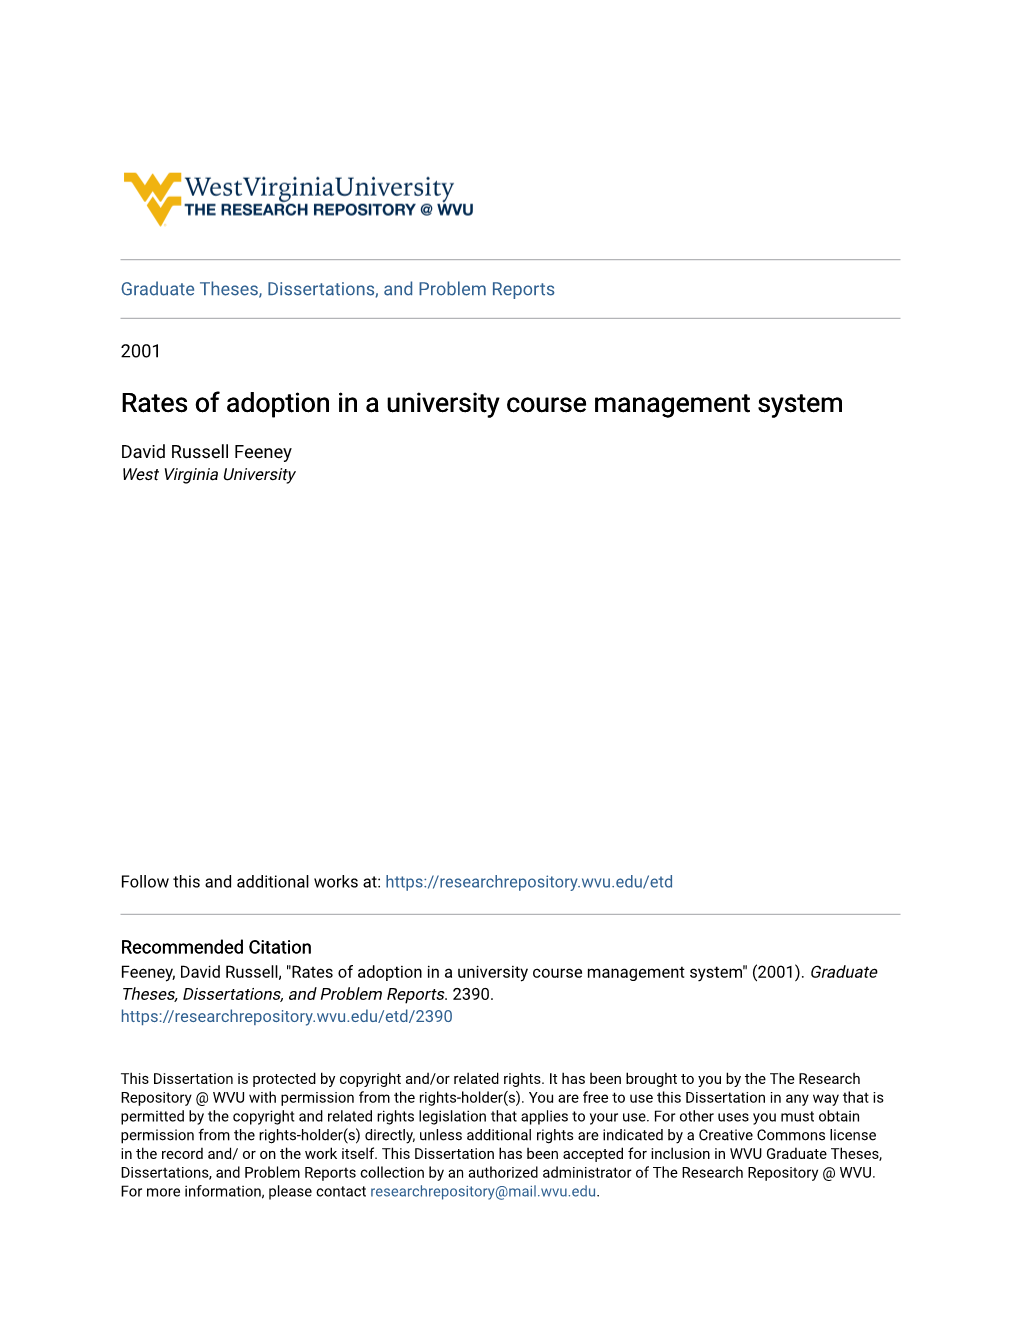 Rates of Adoption in a University Course Management System